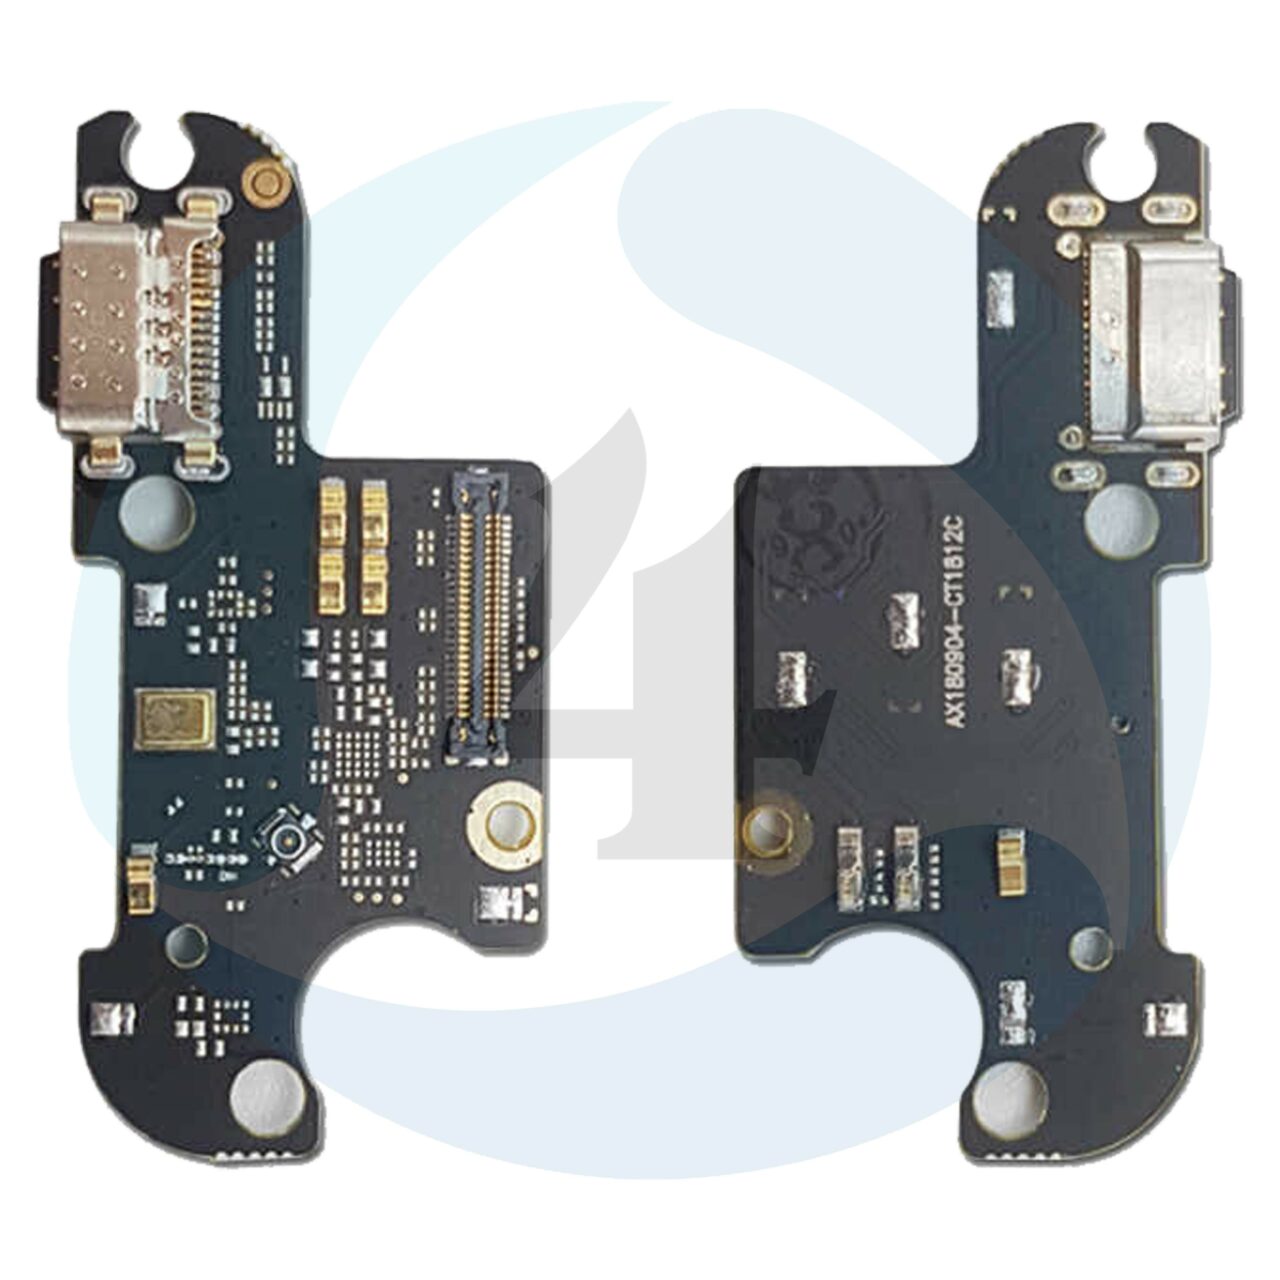 For Xiaomi Mi 8 lite USB Charger Port Dock Connector PCB Board Ribbon Flex Cable Charging jpg q50